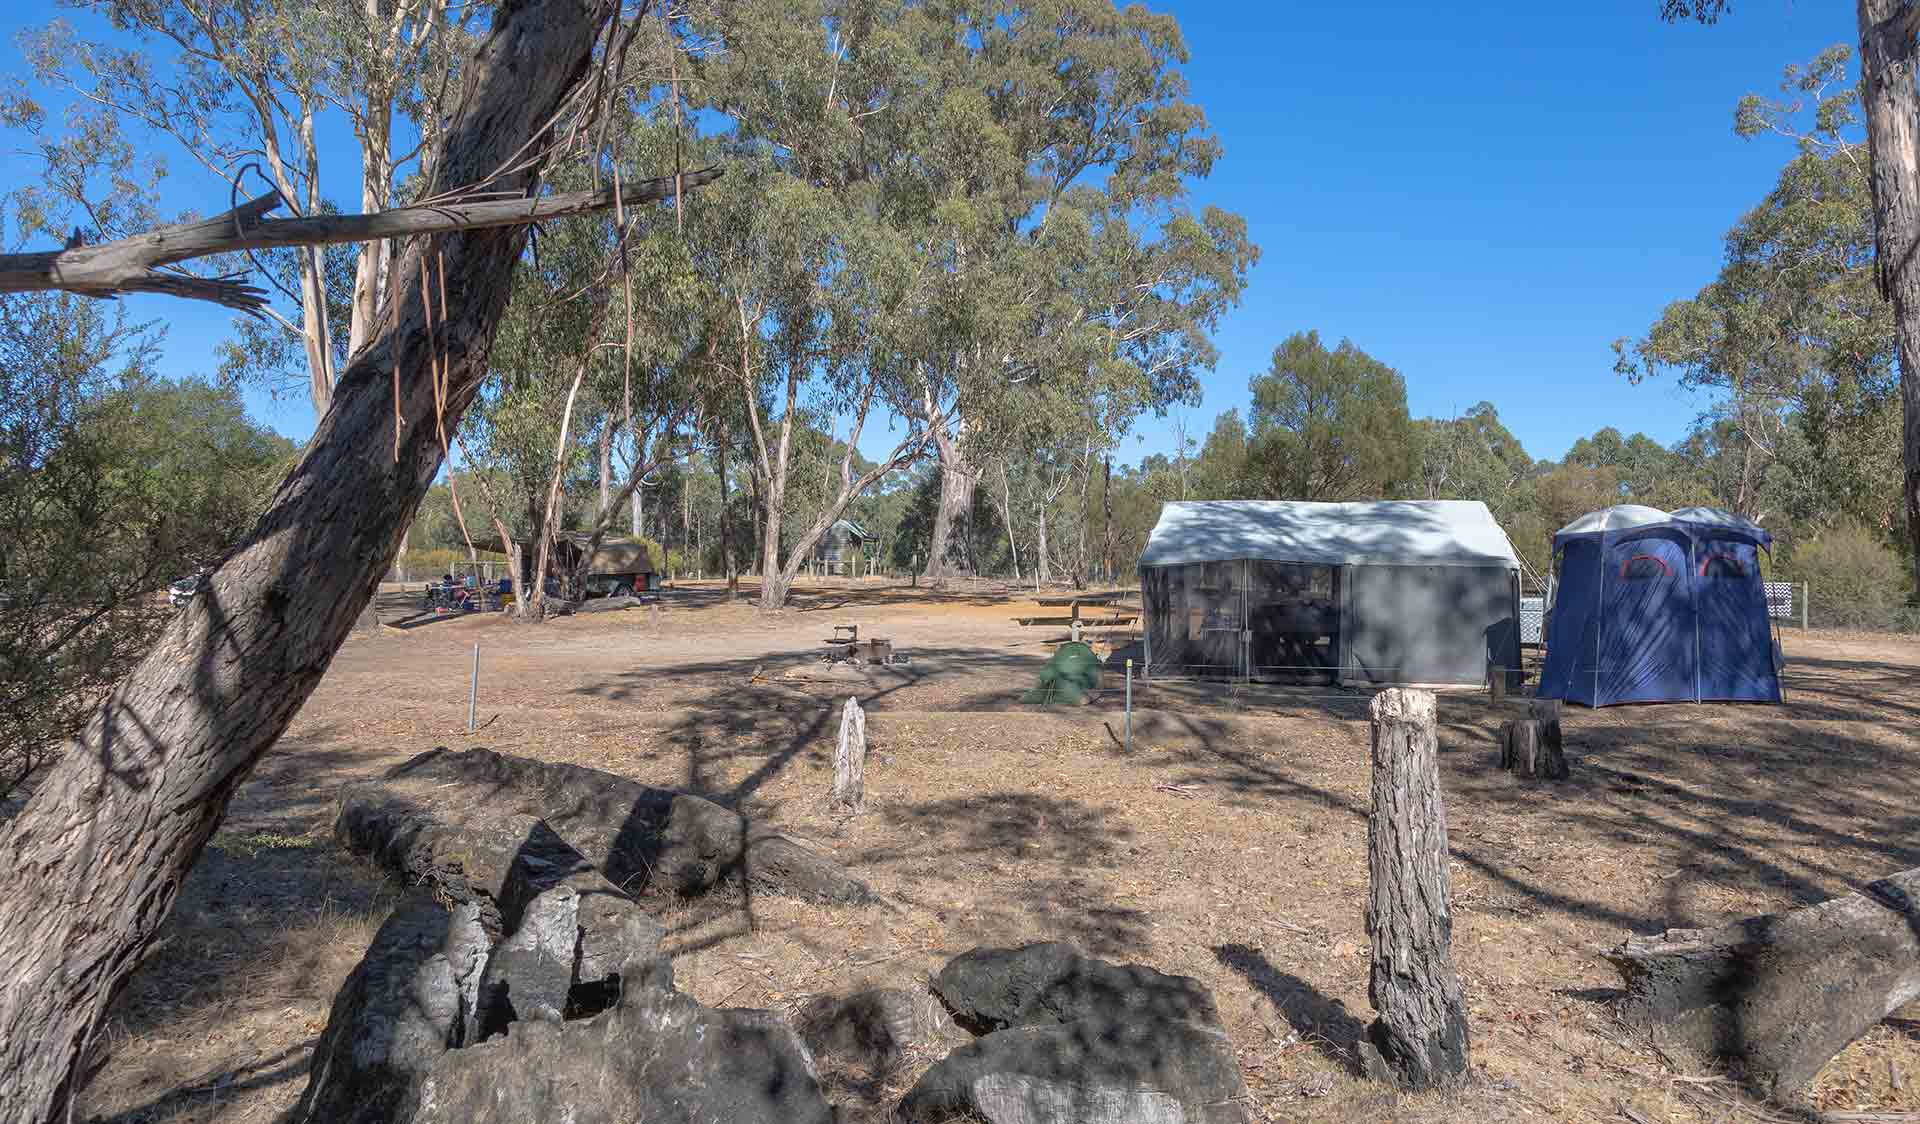 A tent and fireplace at Boreang Campground in the Grampians National Park